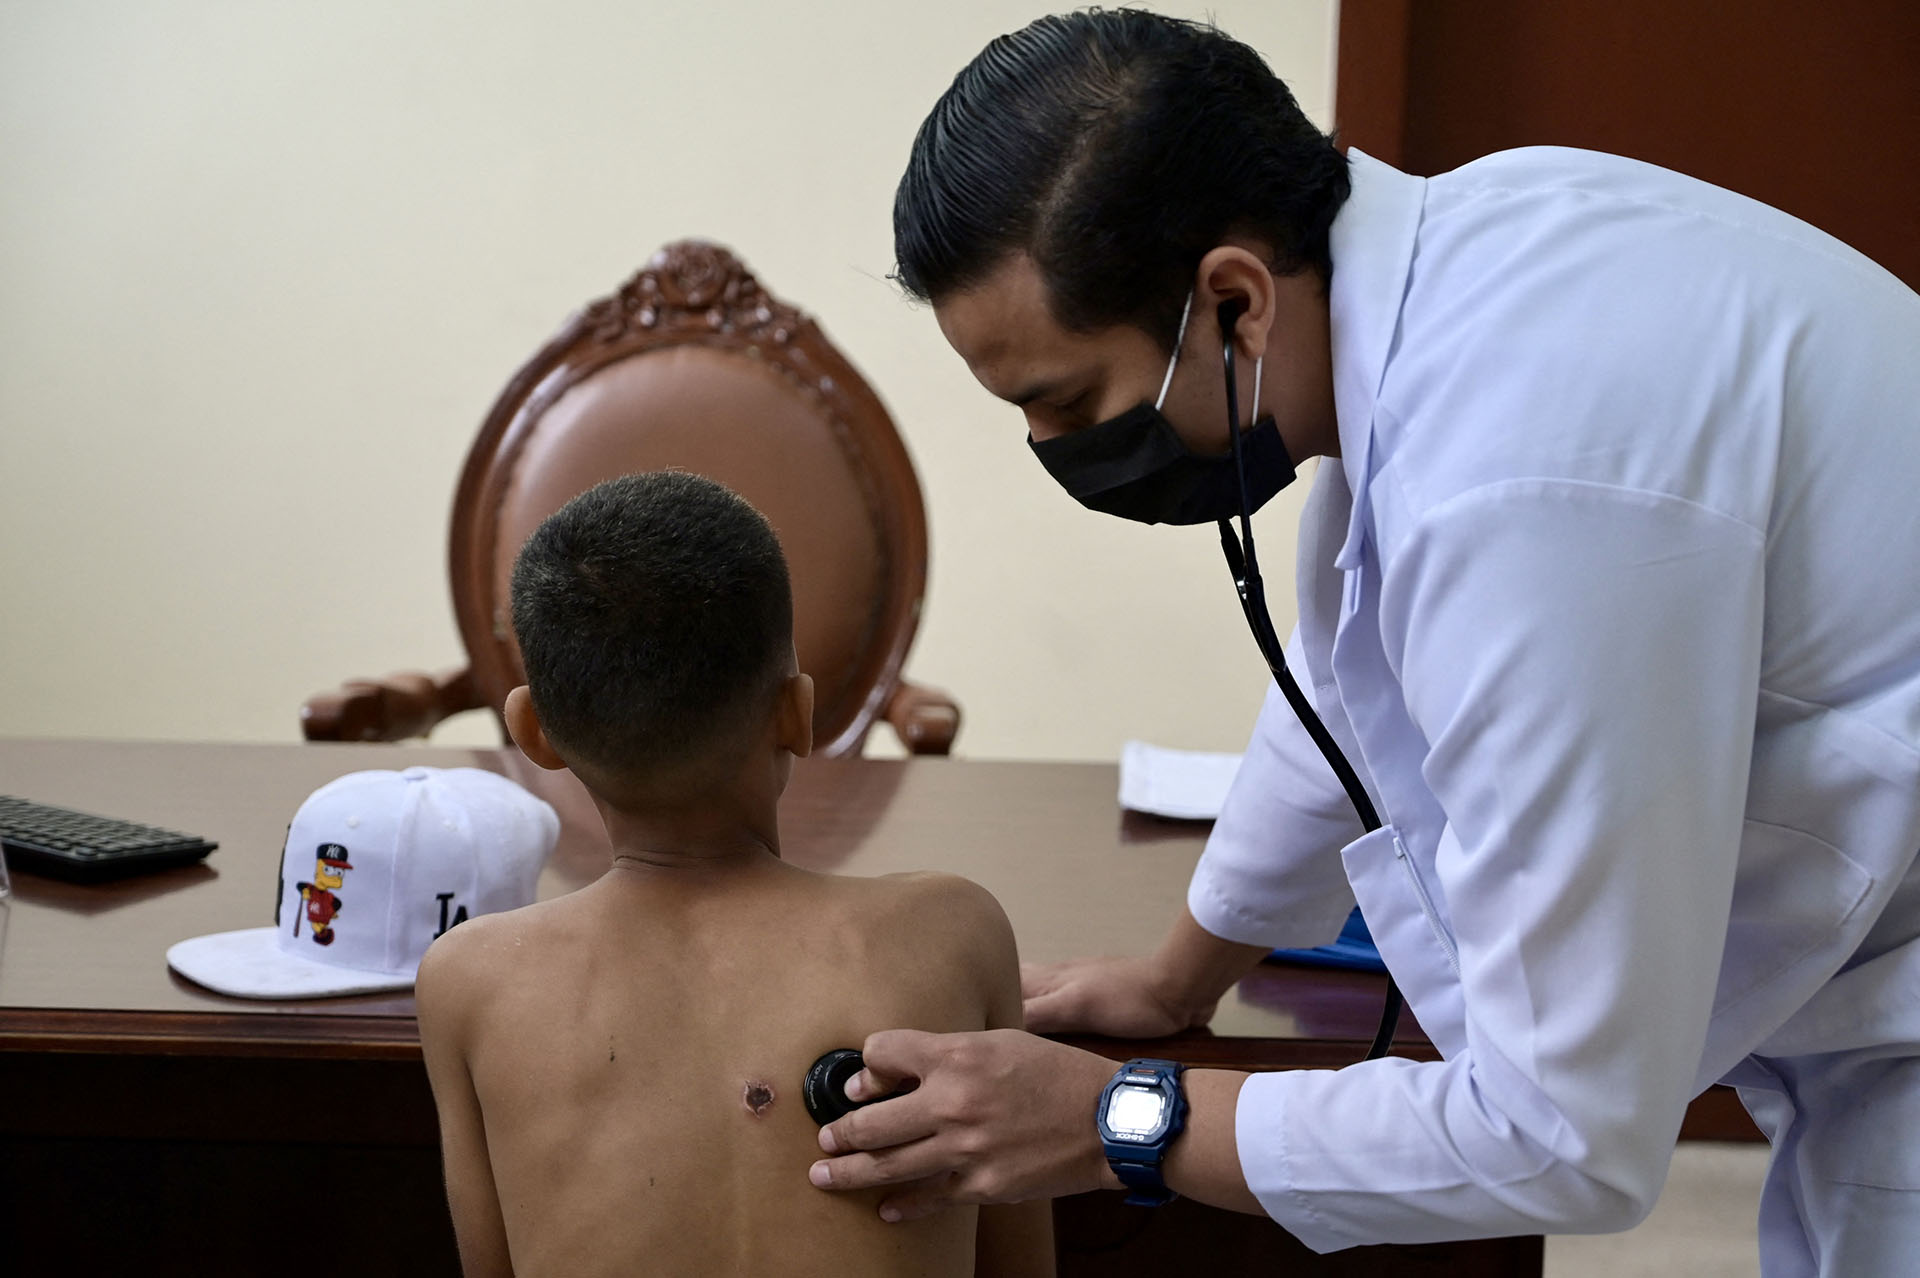 Municipal Program Physician "For a future without drugs", Luis Suárez, cares for a boy with addiction problems after he was shot during a confrontation between gangs.  (Photo by MARCOS PIN / AFP)